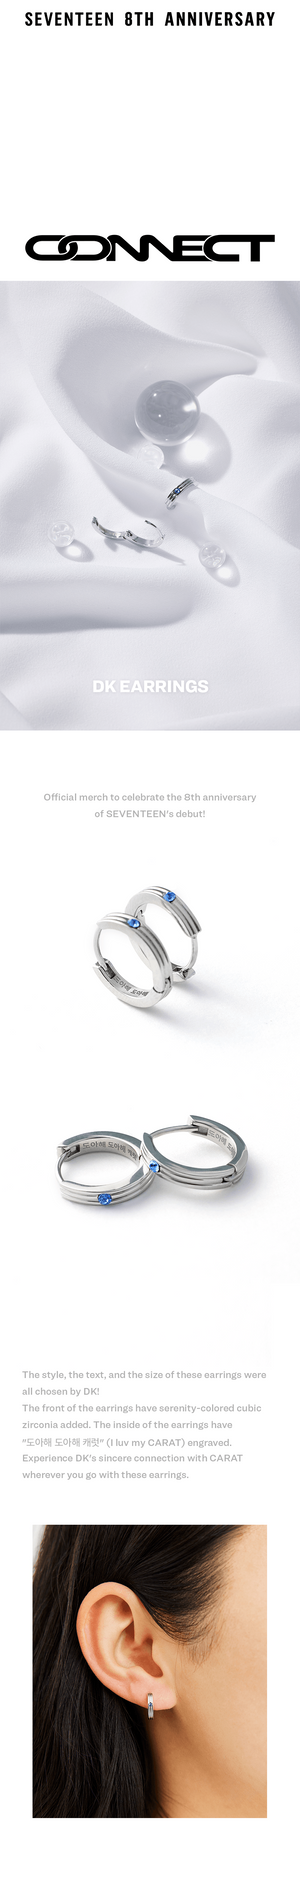 [3RD PRE-ORDER] SEVENTEEN - 8TH ANNIVERSARY OFFICIAL MD - COKODIVE